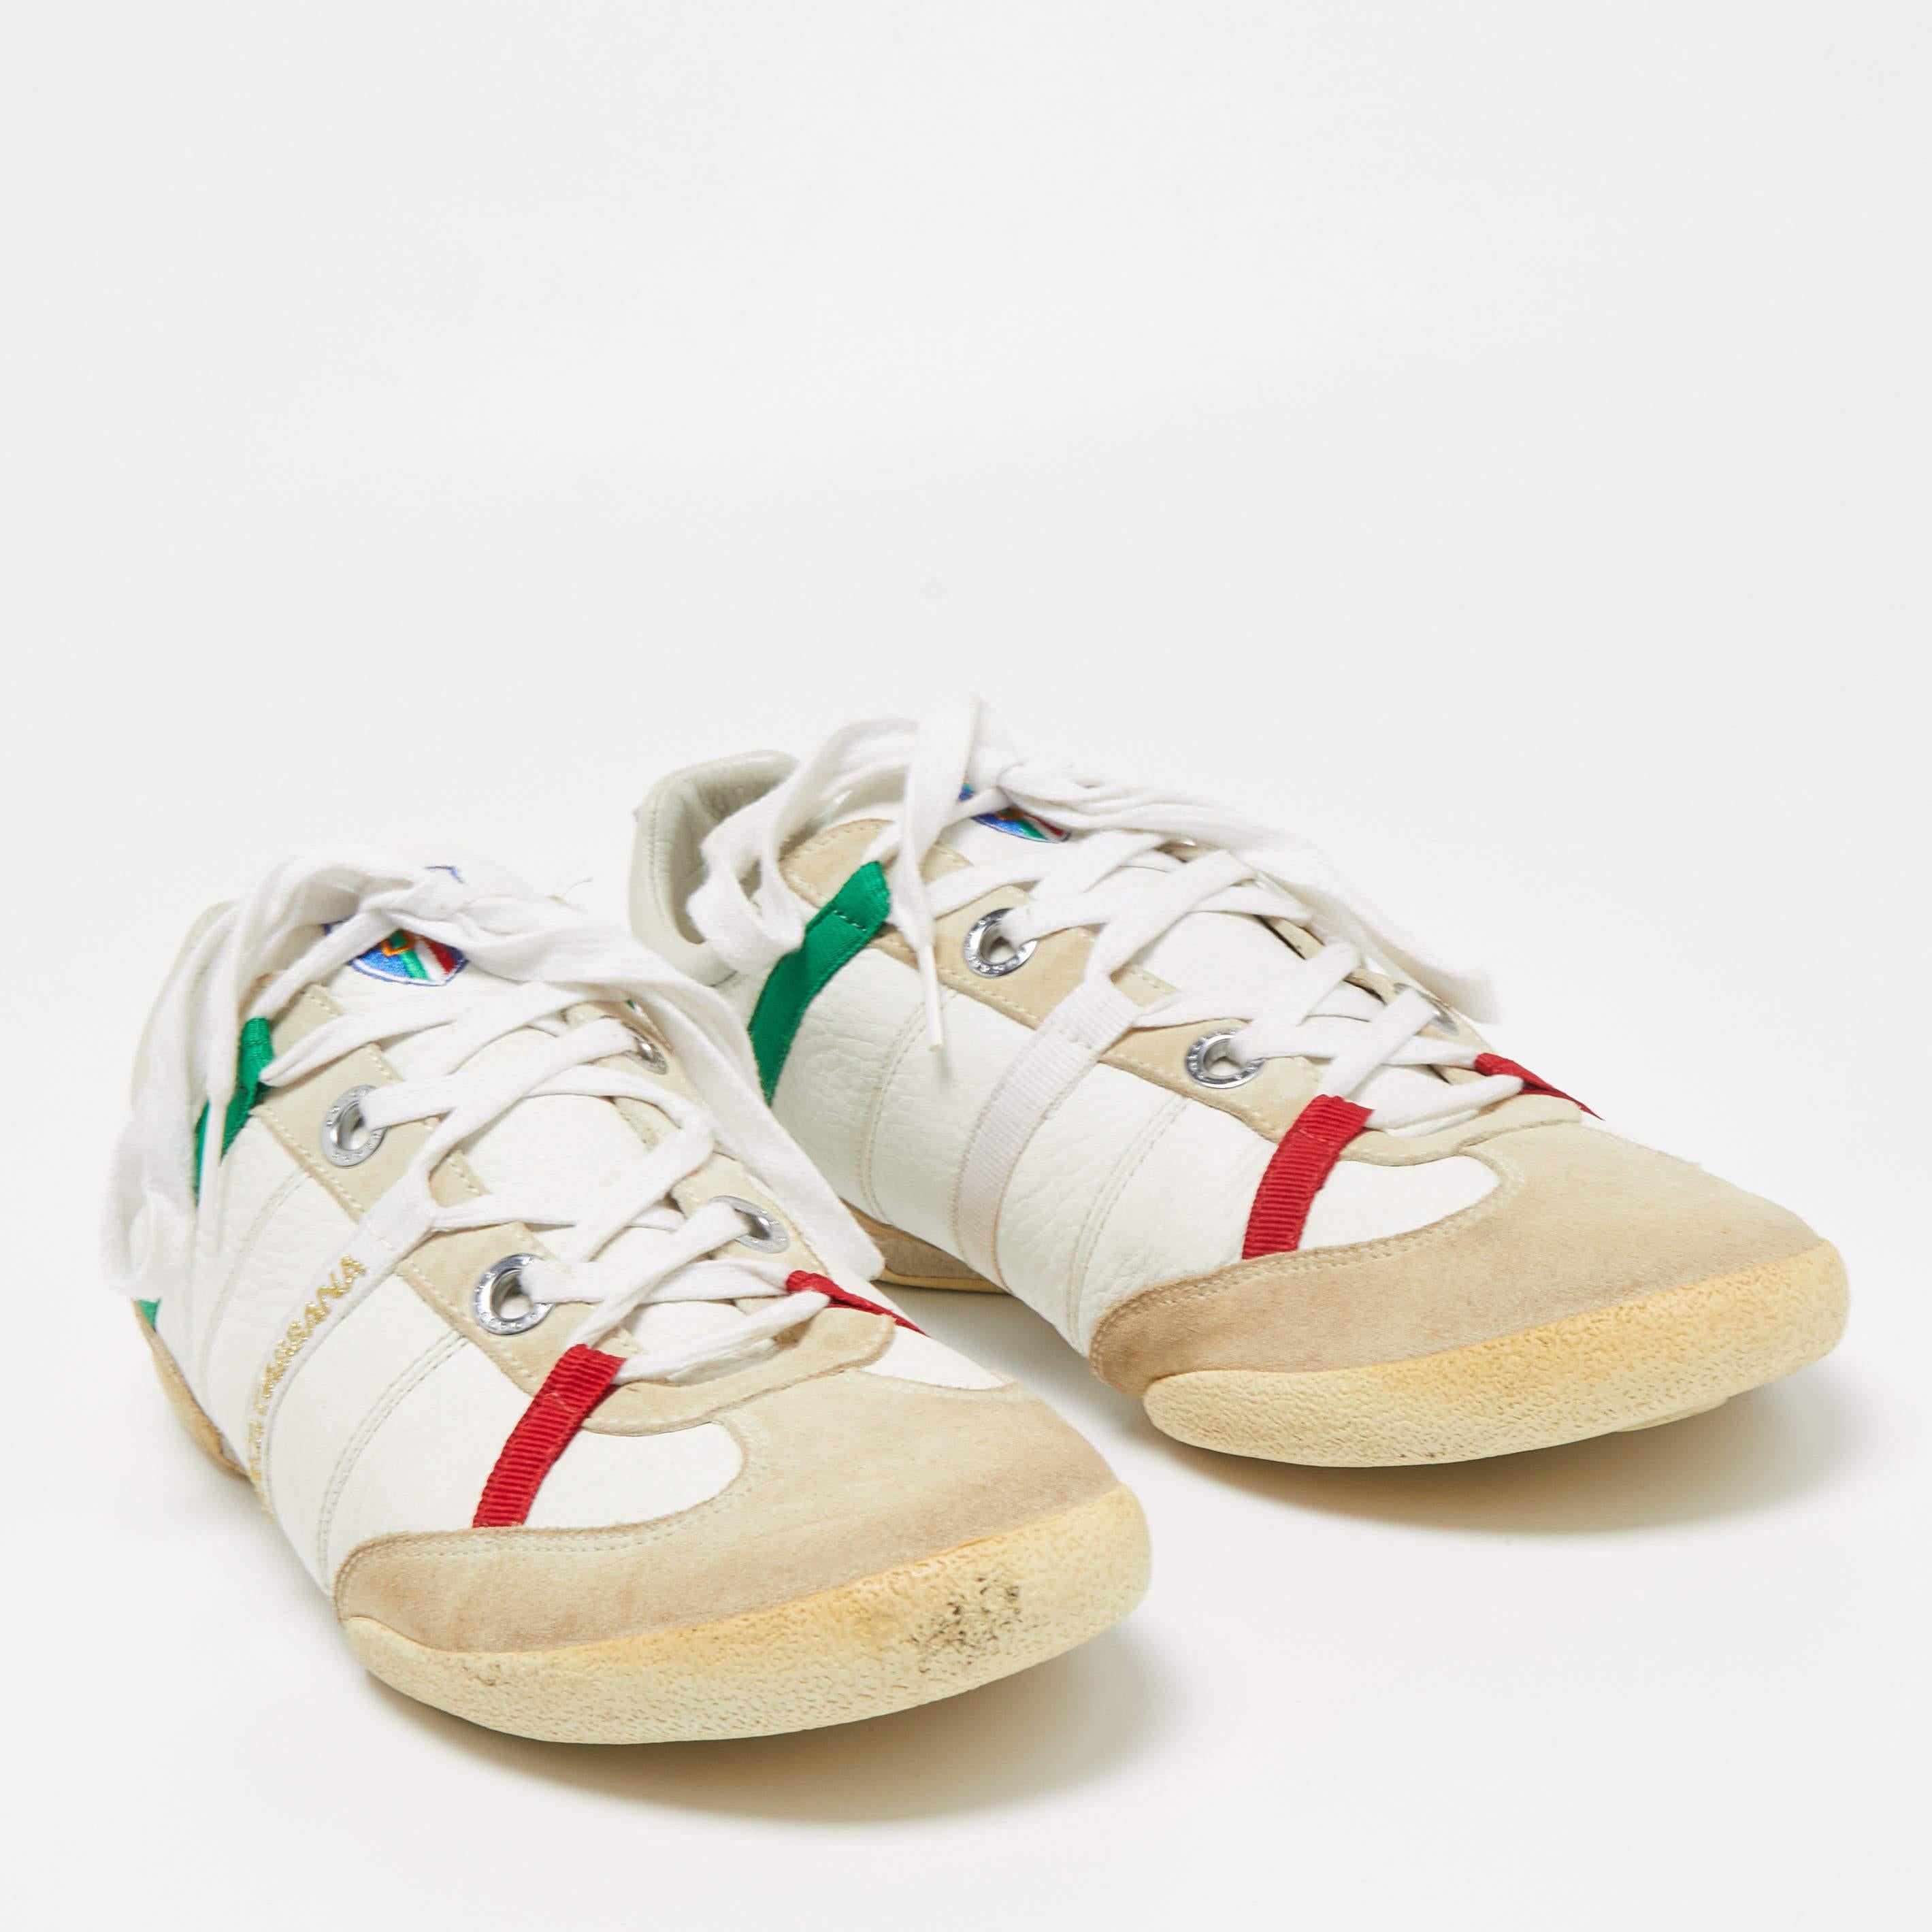 Give your outfit a luxe update with this pair of Dolce & Gabbana sneakers. The shoes are sewn perfectly to help you make a statement in them for a long time.

